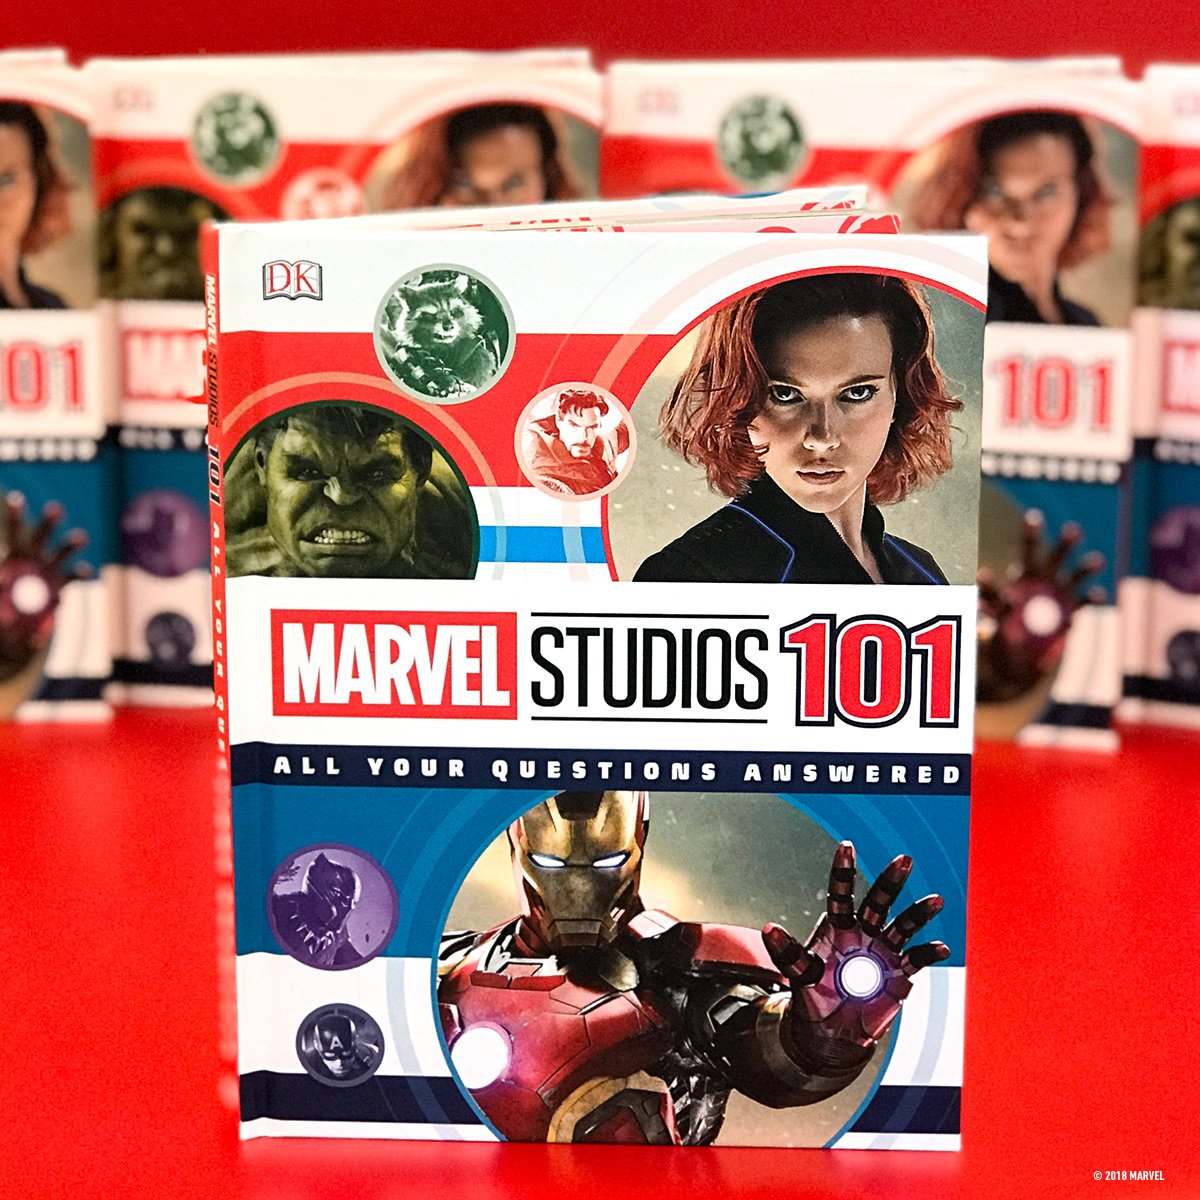 Can't keep track of all the @MarvelStudios movies? This book will set you straight. bit.ly/Marvel-101